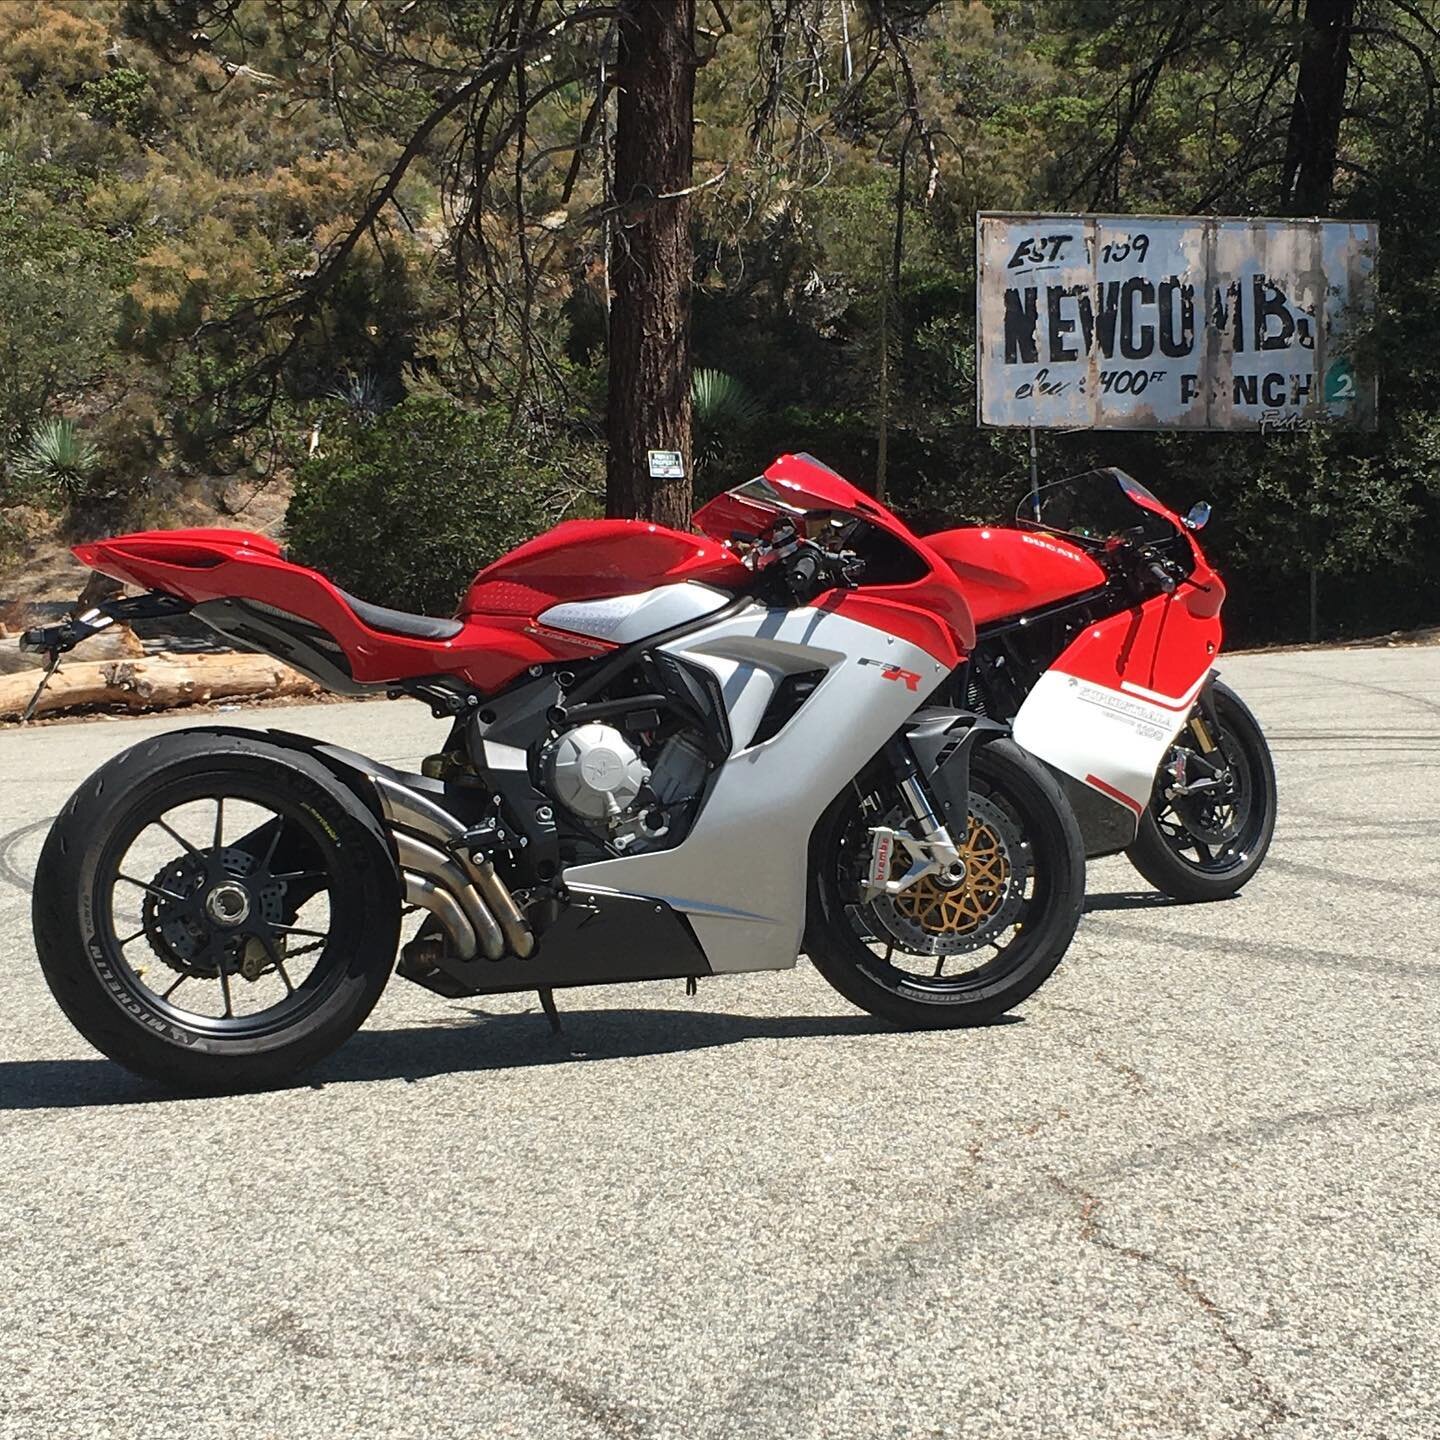 only the coolest bikes allowed at #newcombsranch this morning 

@champagnedglenn

#mvagustaf3r